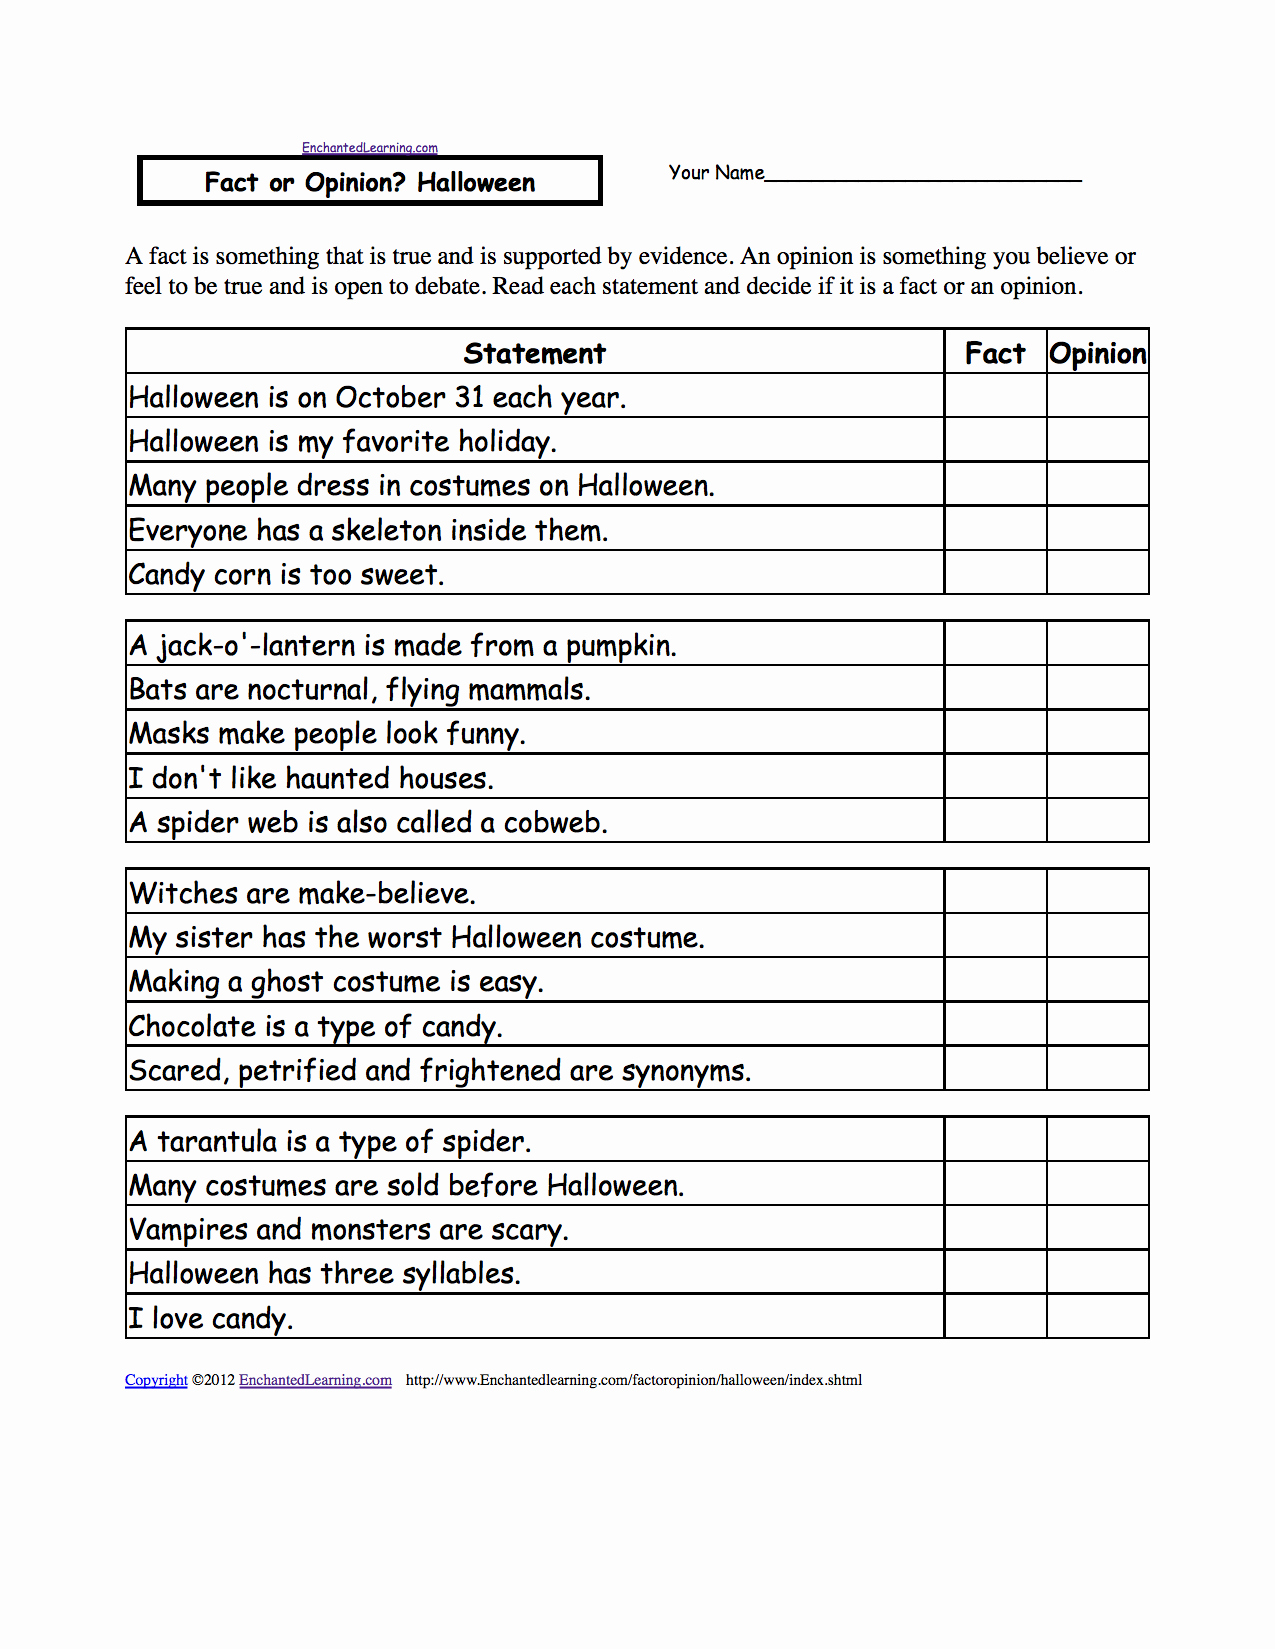 Fact or Opinion Worksheet Awesome Fact or Opinion Checkmark Worksheets to Print